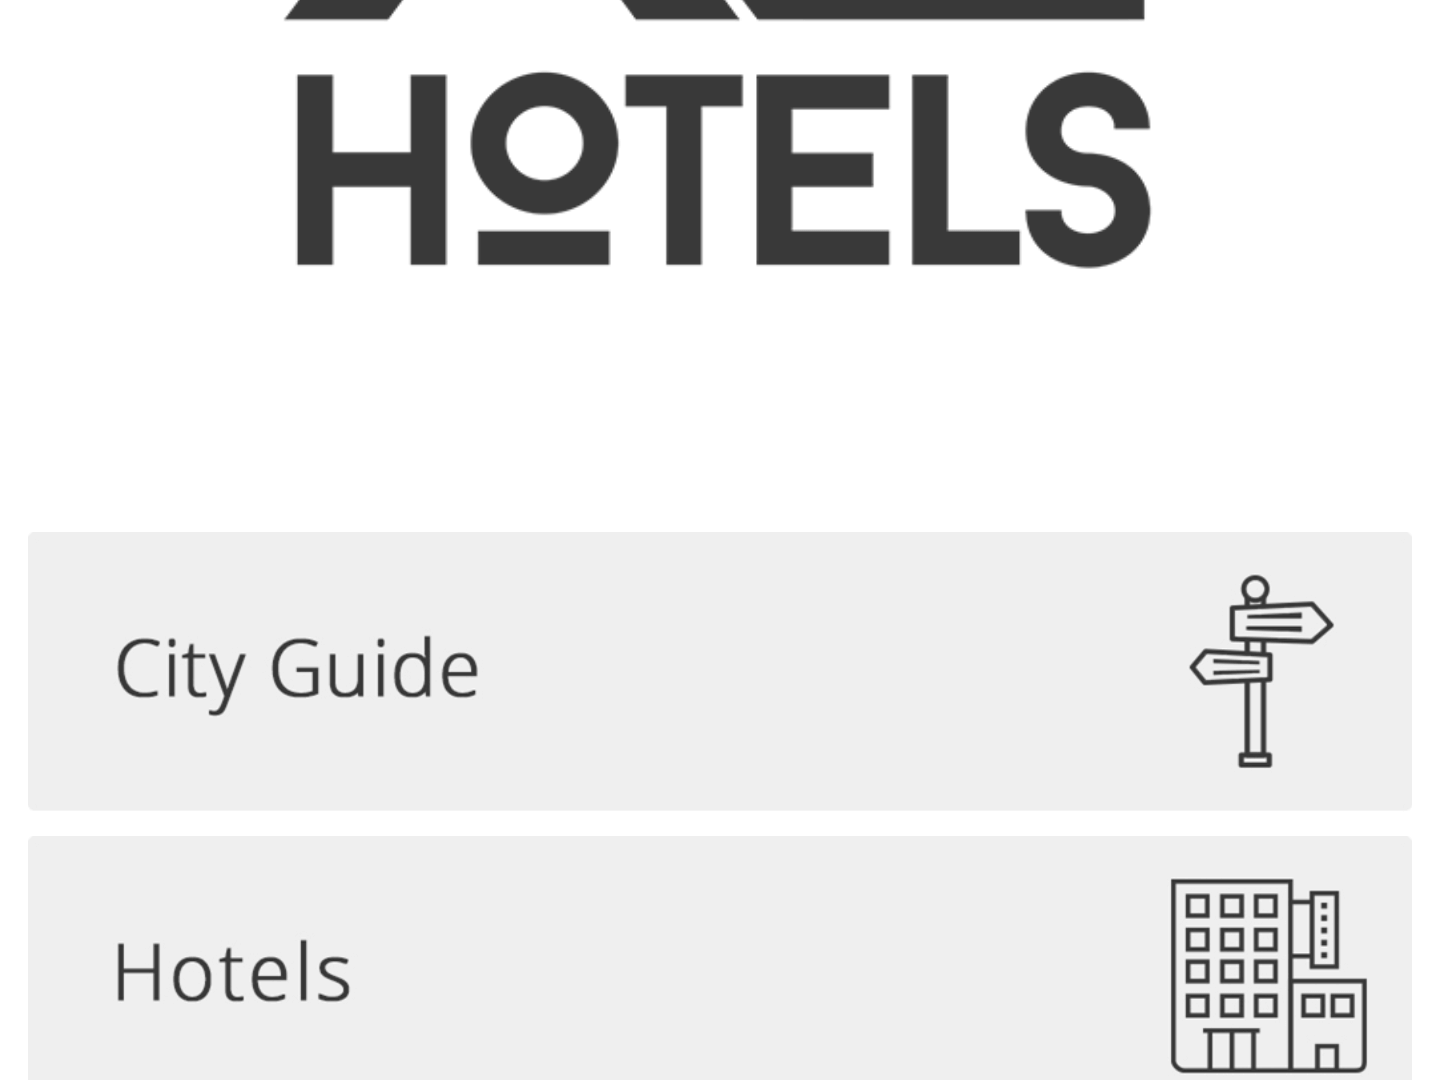 The app of XO Hotels